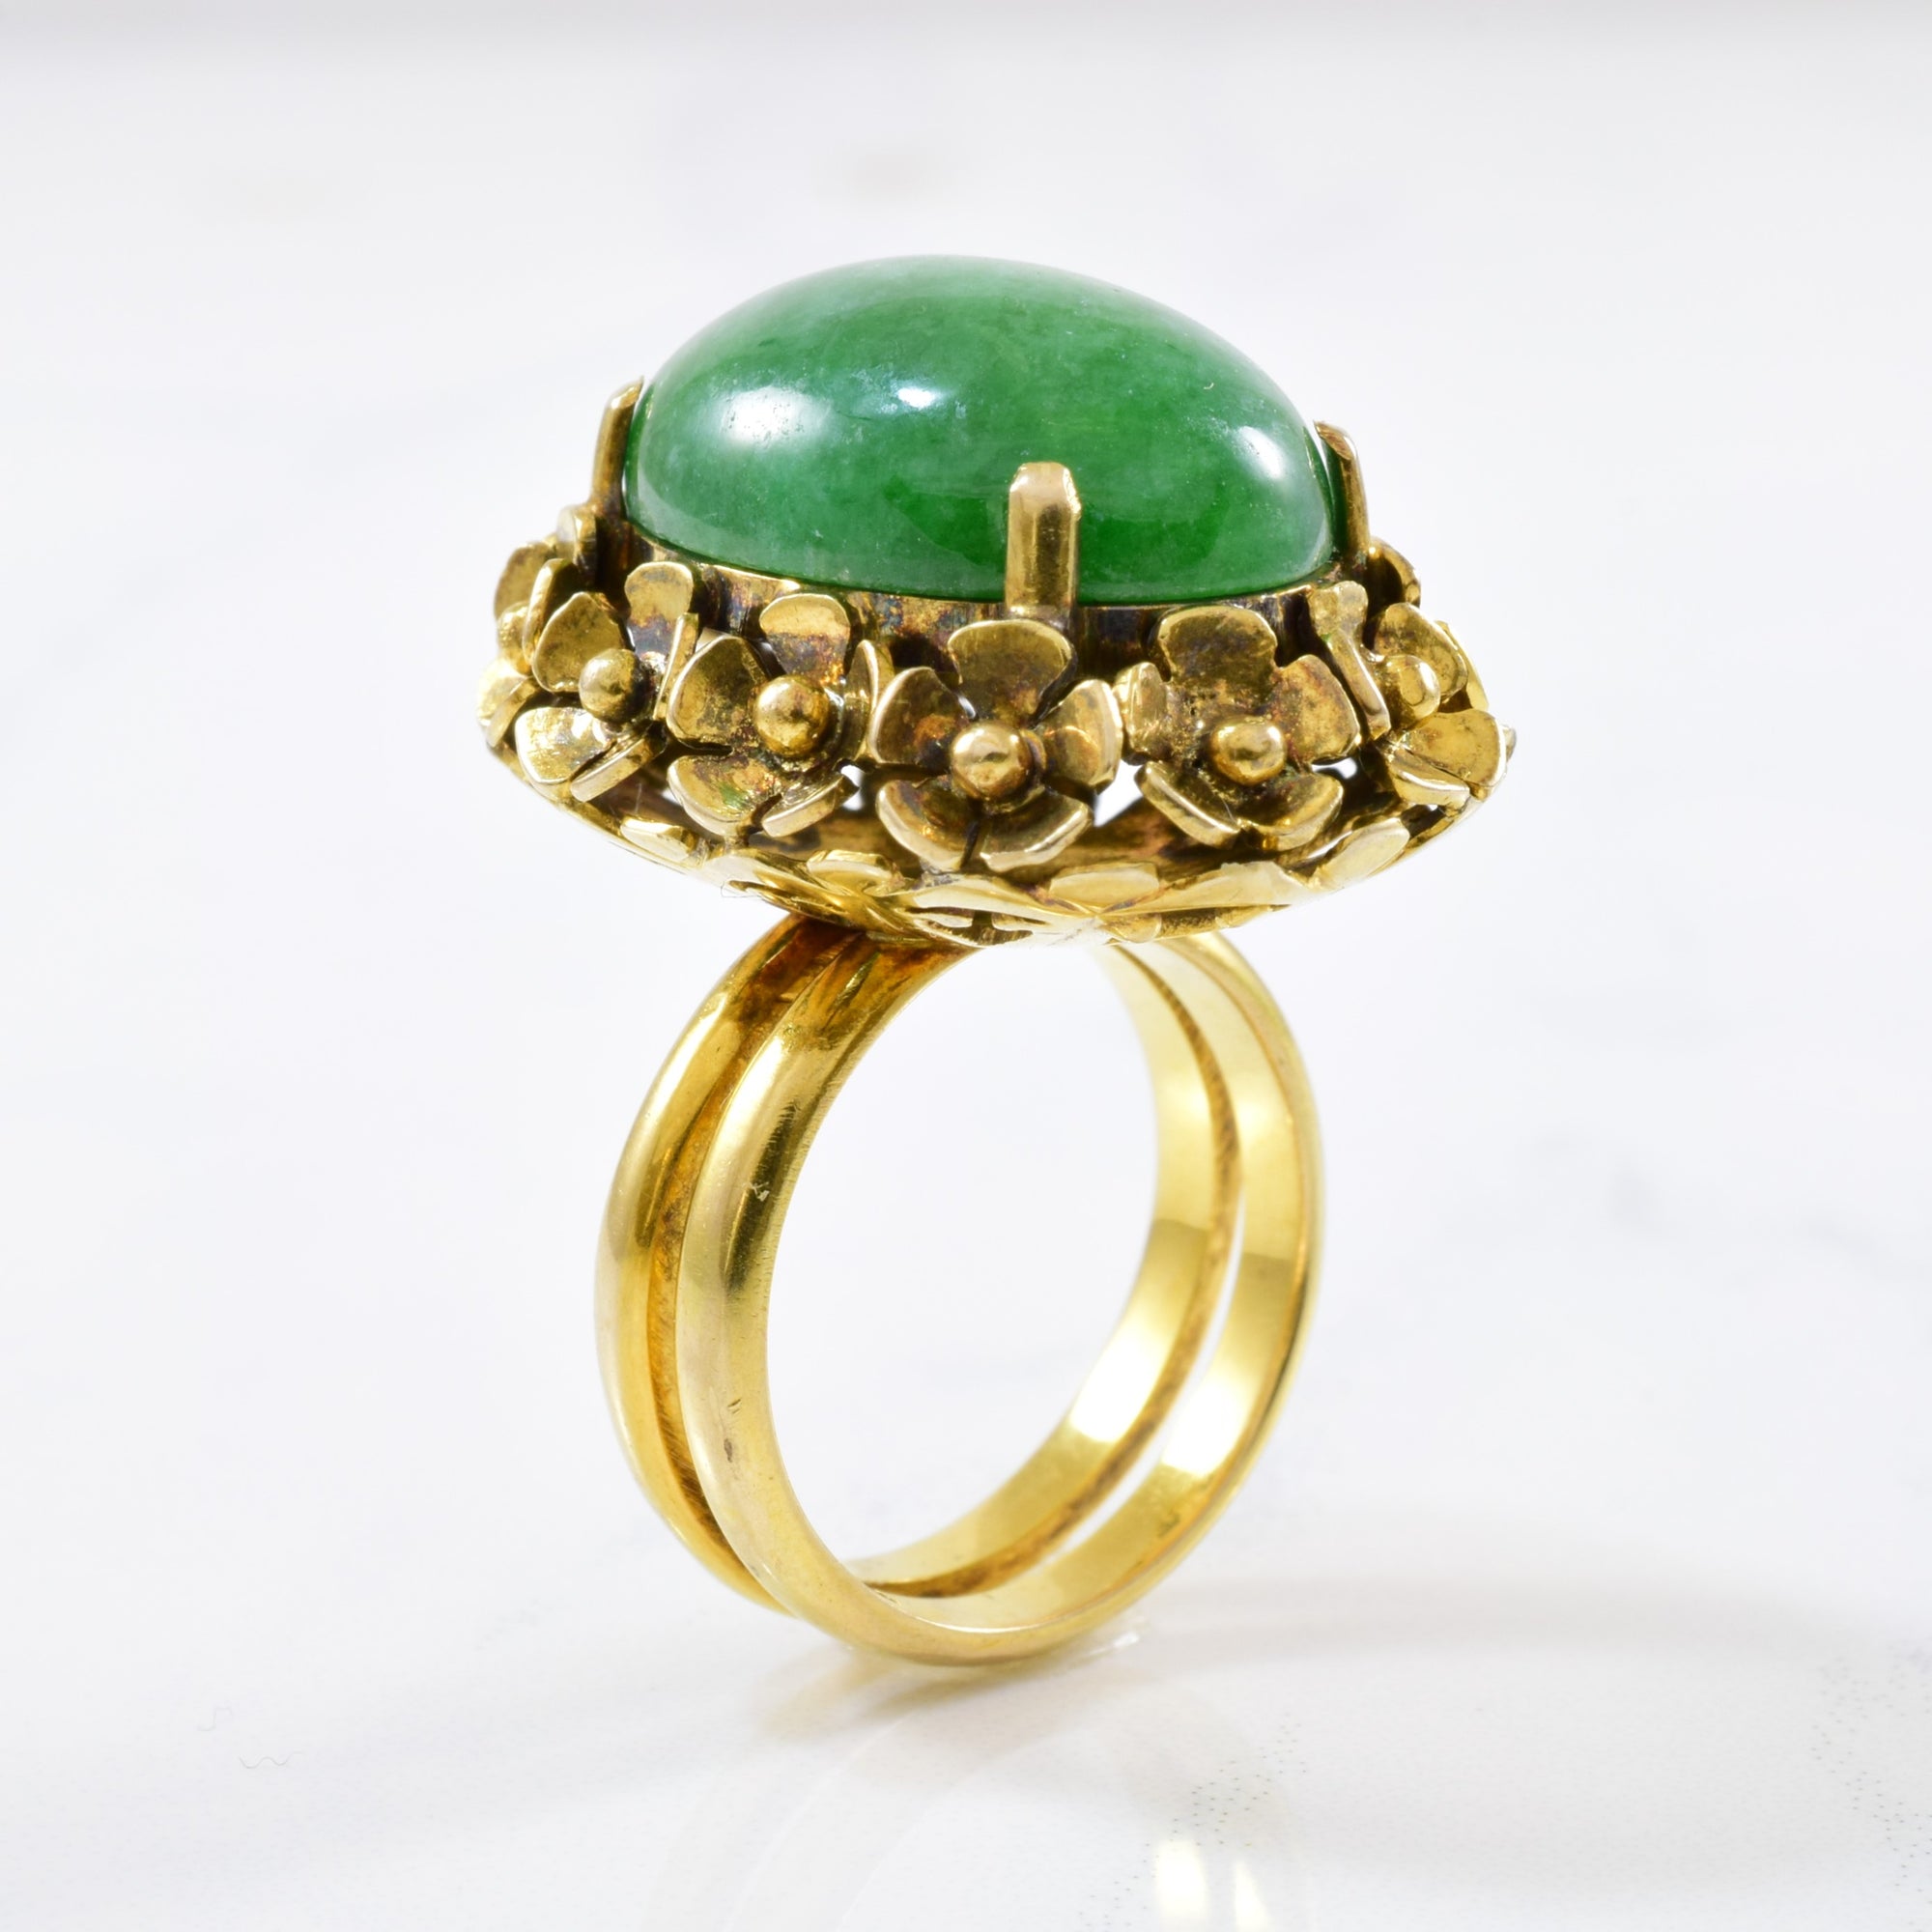 Double Banded Floral Jadeite Cocktail Ring | 11.61ct | SZ 4.5 |